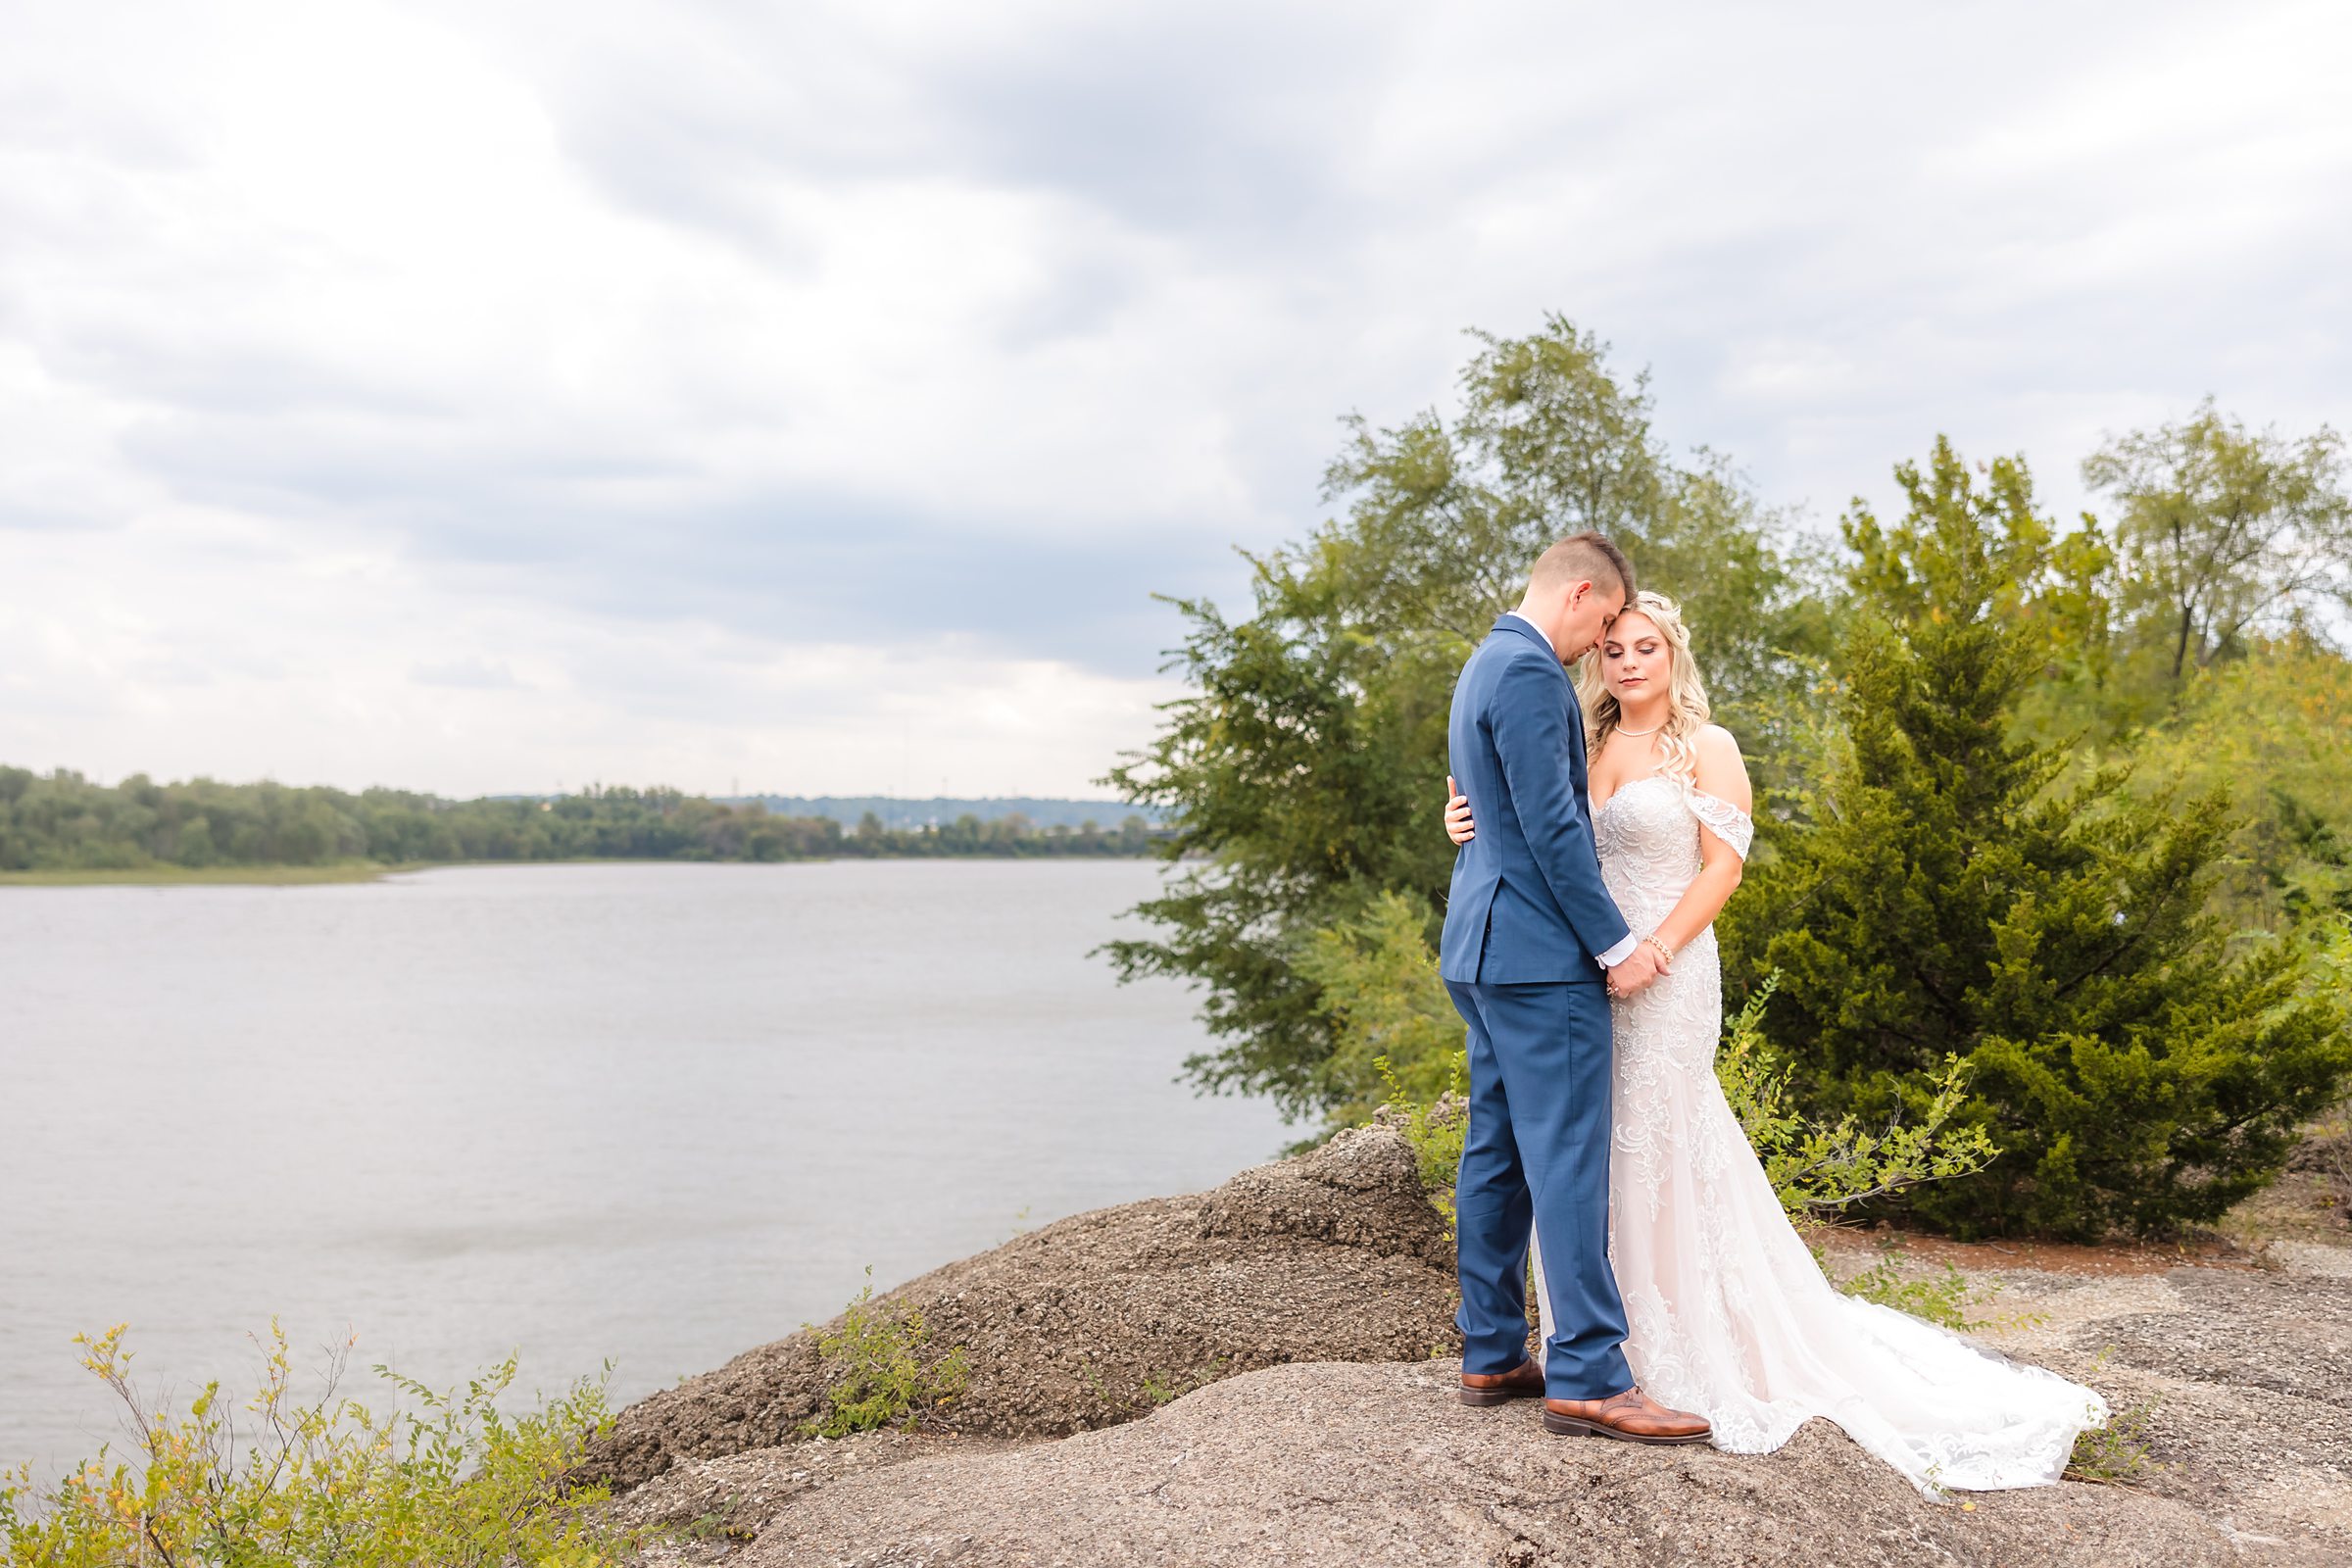 Bride embrace on the Peoria riverfront in Peoria, Illinois